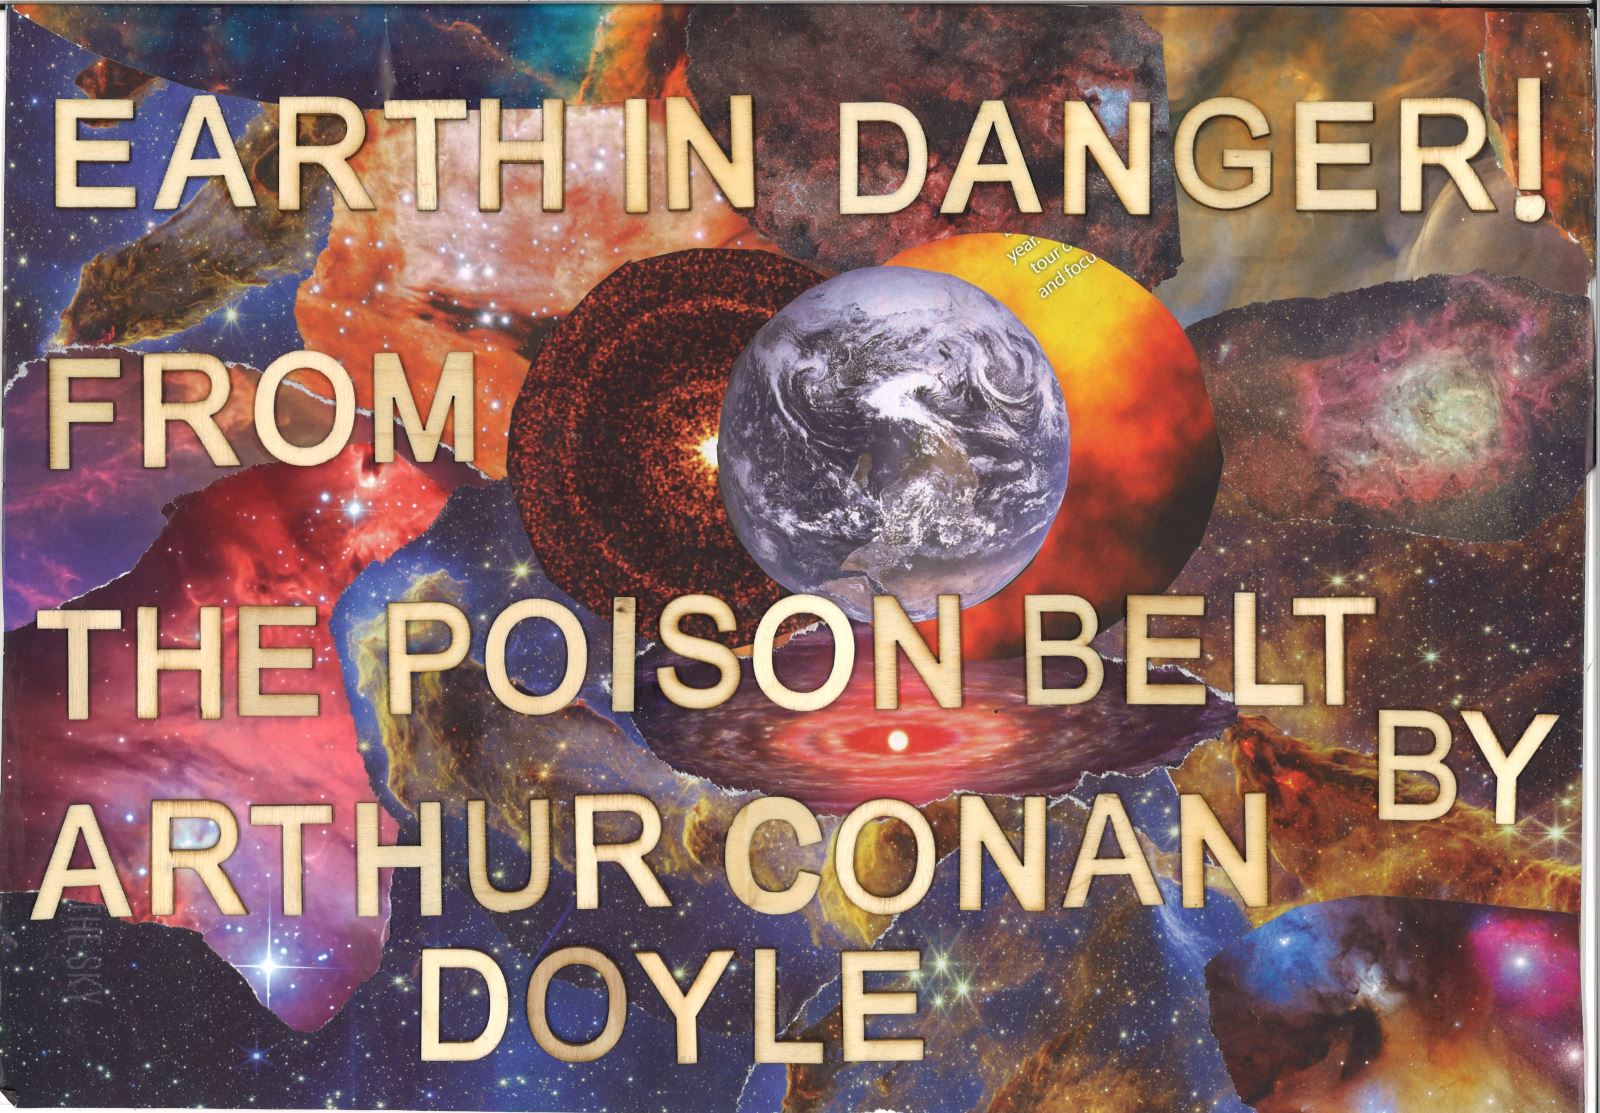 Poster of the poison belt made by one of our detectives showing the earth getting assaulted by belts of poison gas